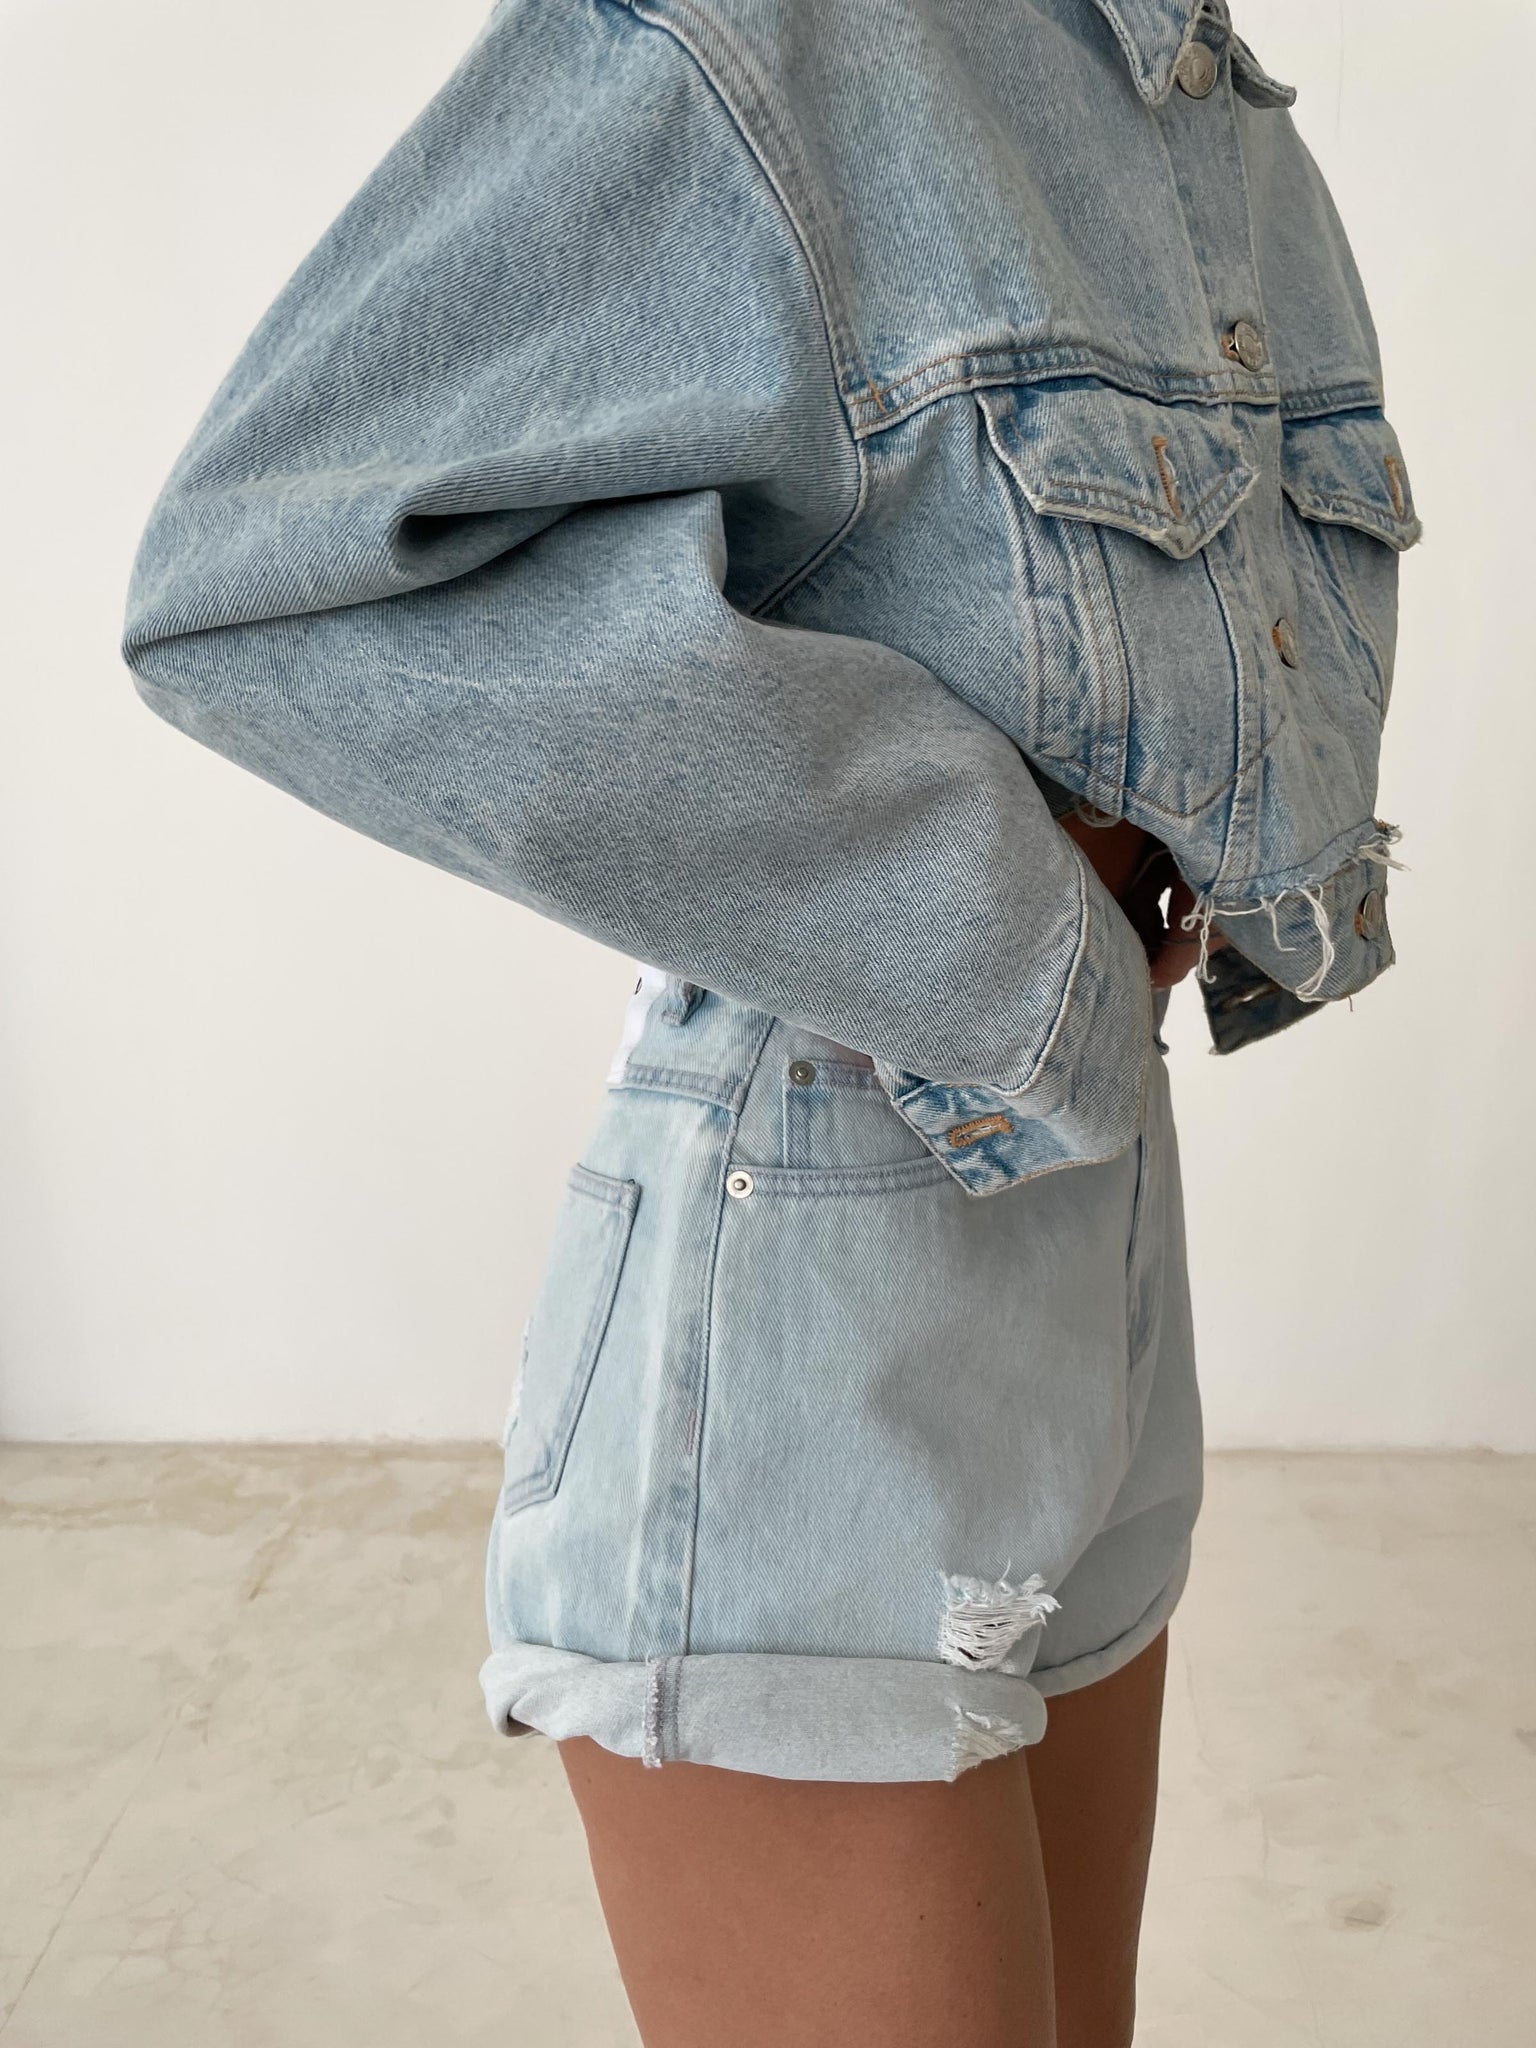 STOCK IN CANADA-ROLL UP SHORTS in BLUE (NO INTEGRATED WAIST ELASTIC)